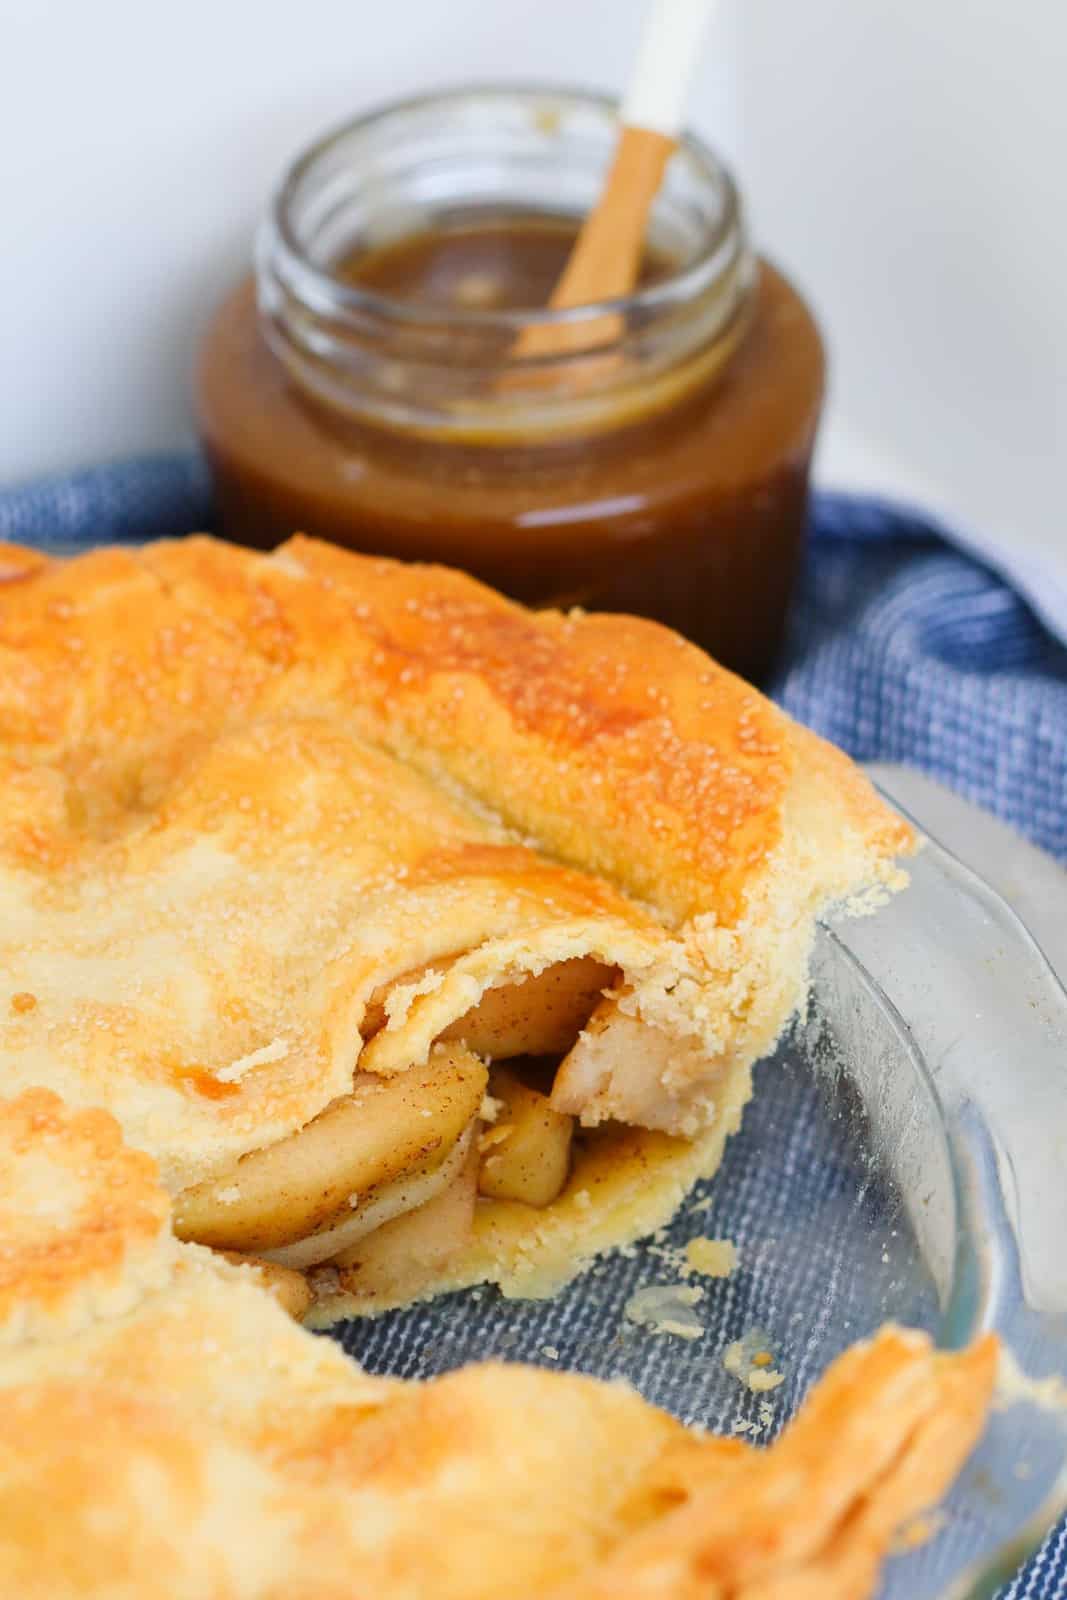 An apple pie with flakey pastry and apple filling in a baking dish.